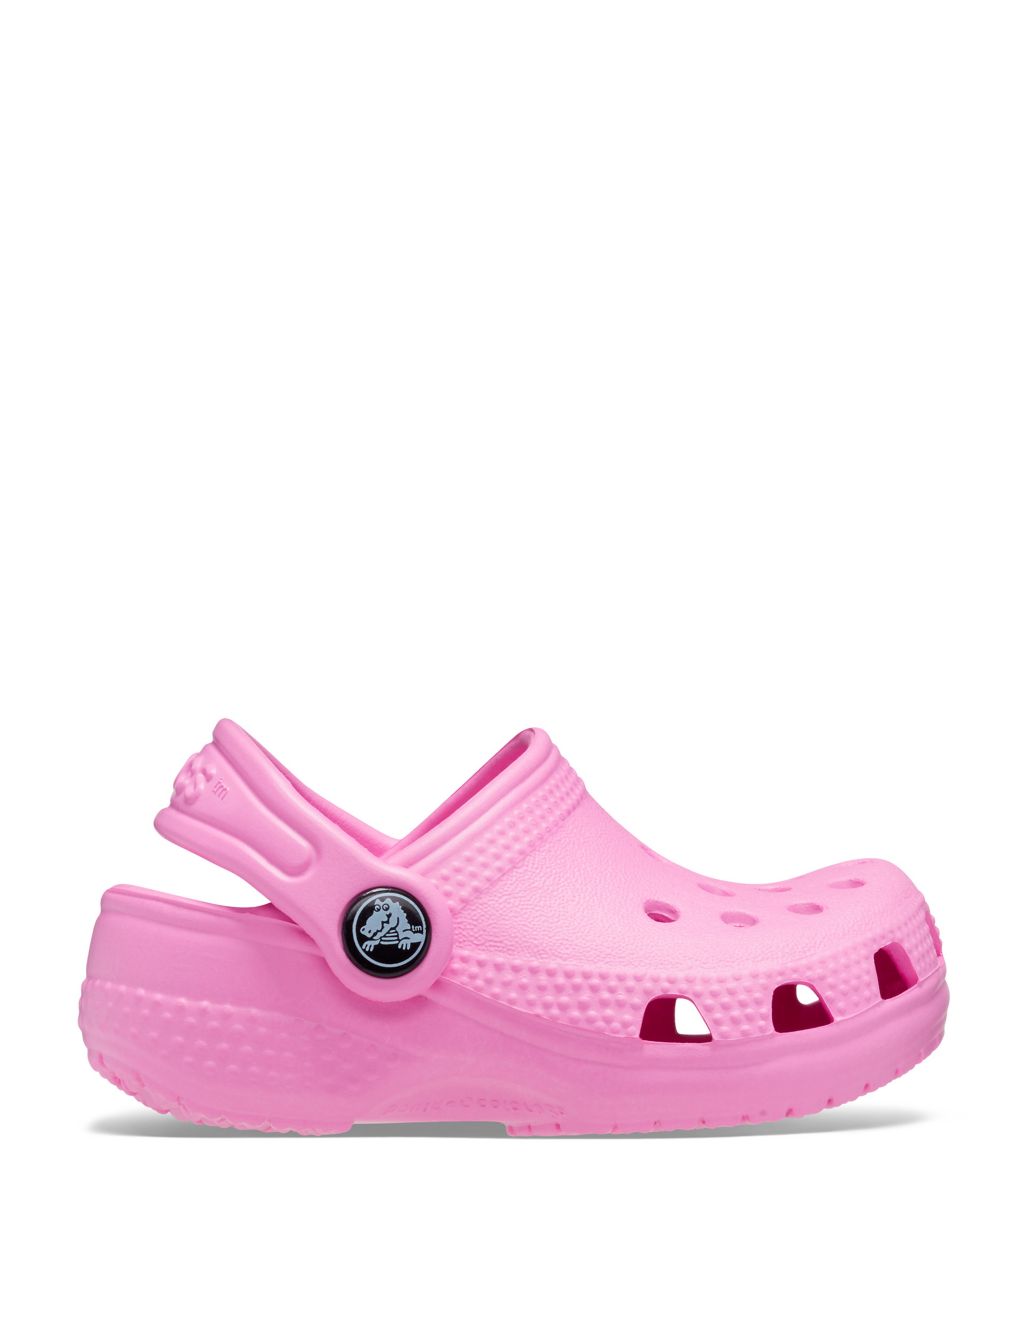 Kids' Slip-on Clogs (2 Small - 3 Small)